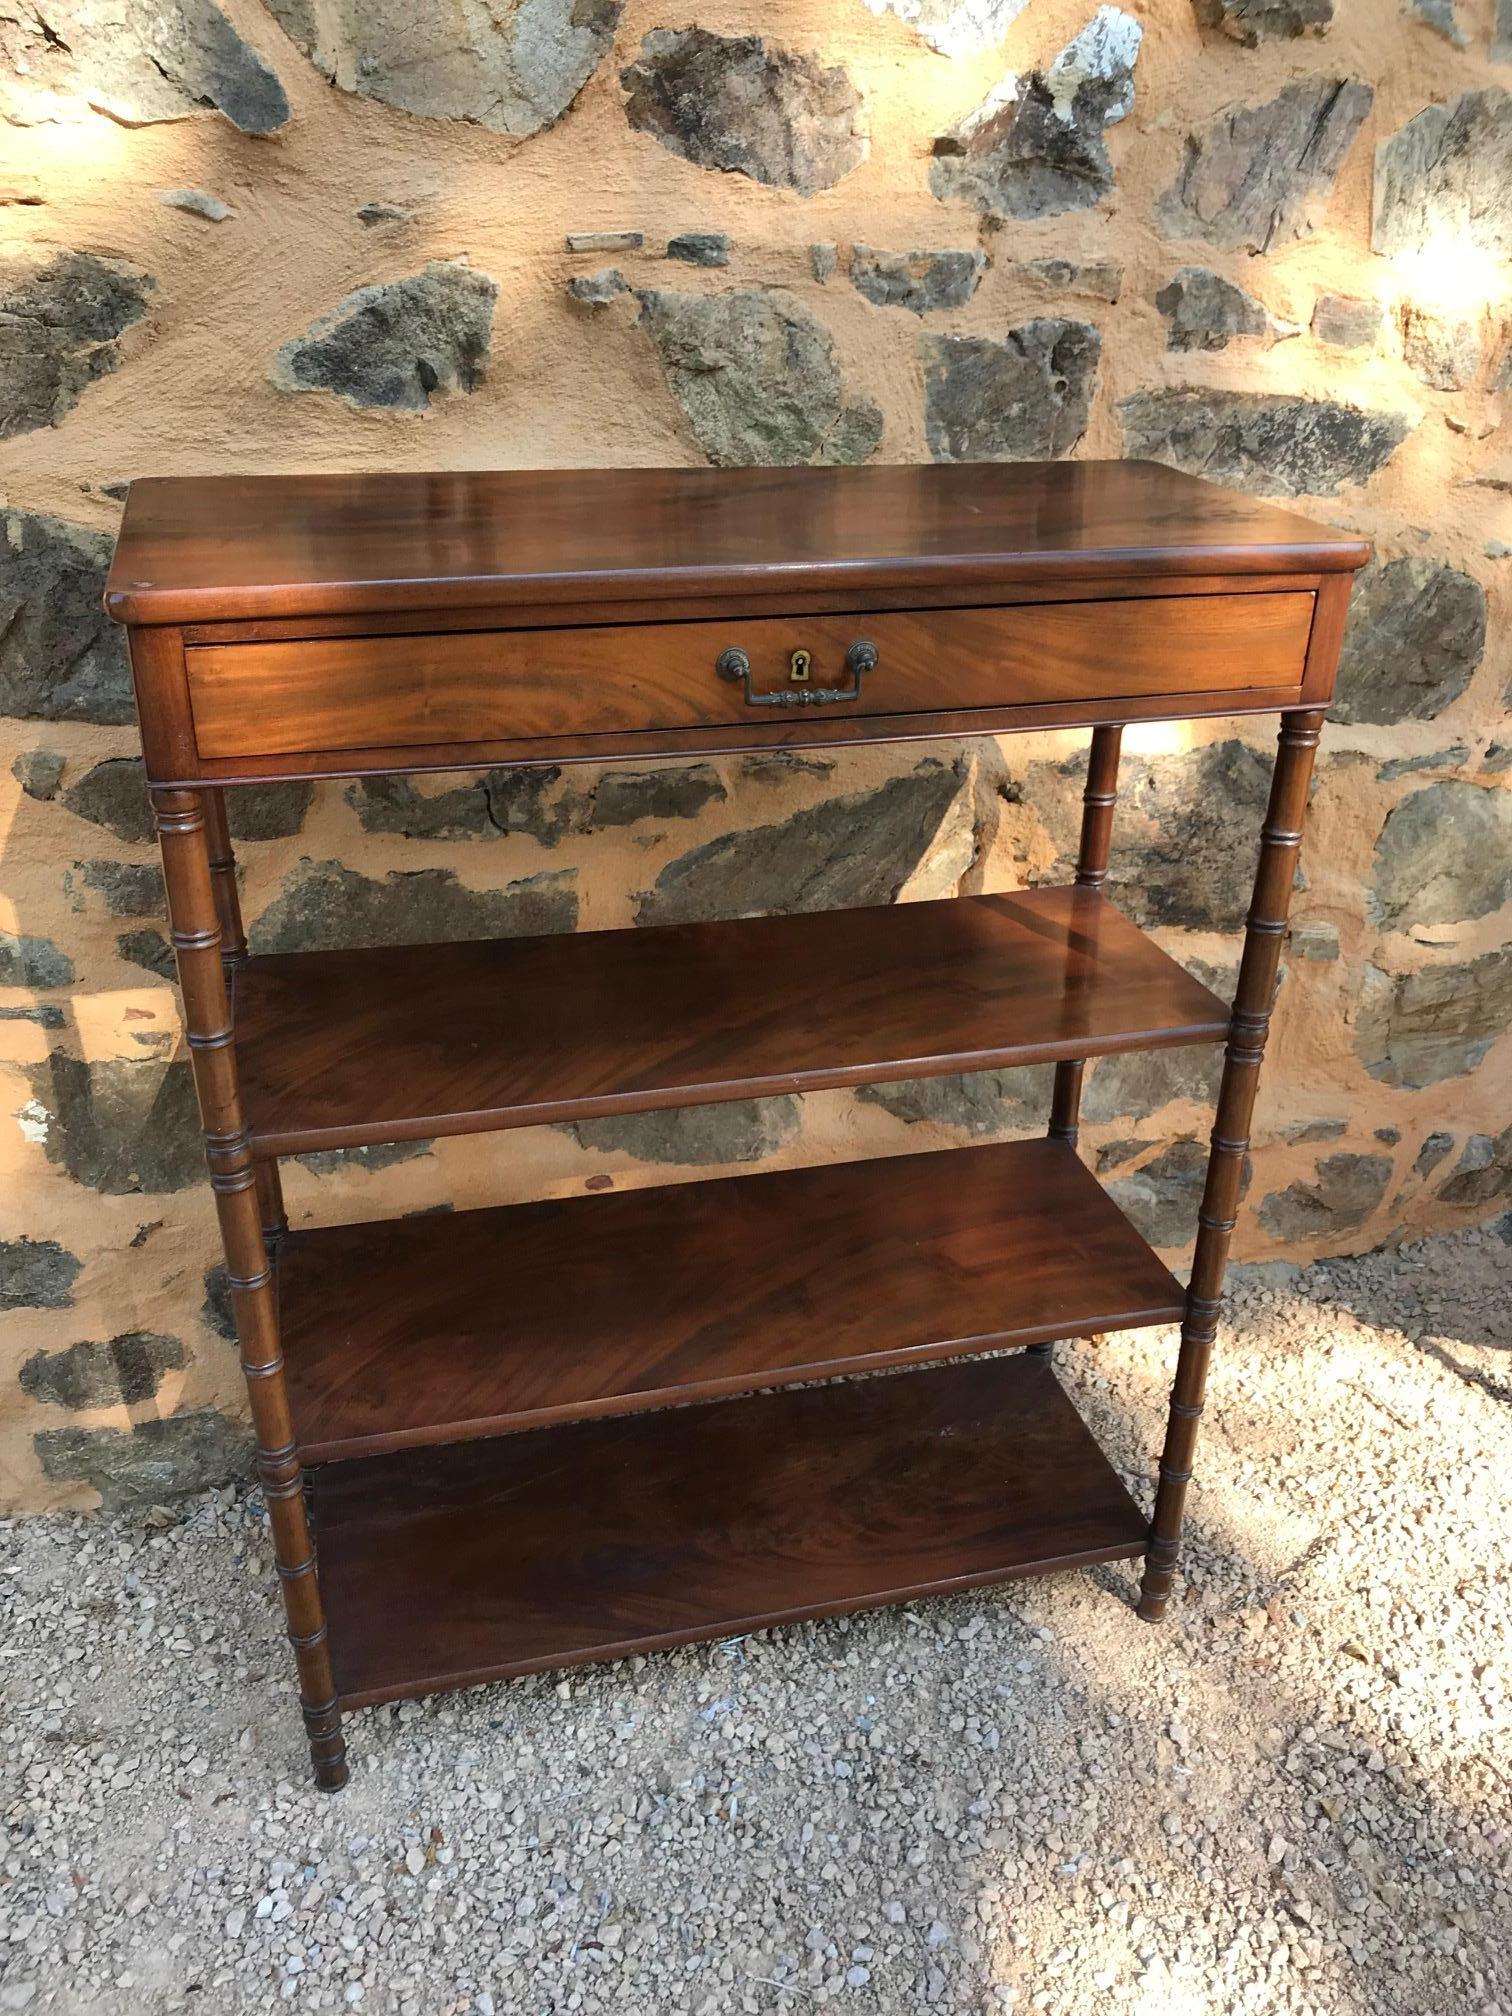 Beautiful 20th century French Directoire style mahogany console table from the 1920s.
Large drawer. Three shelves.